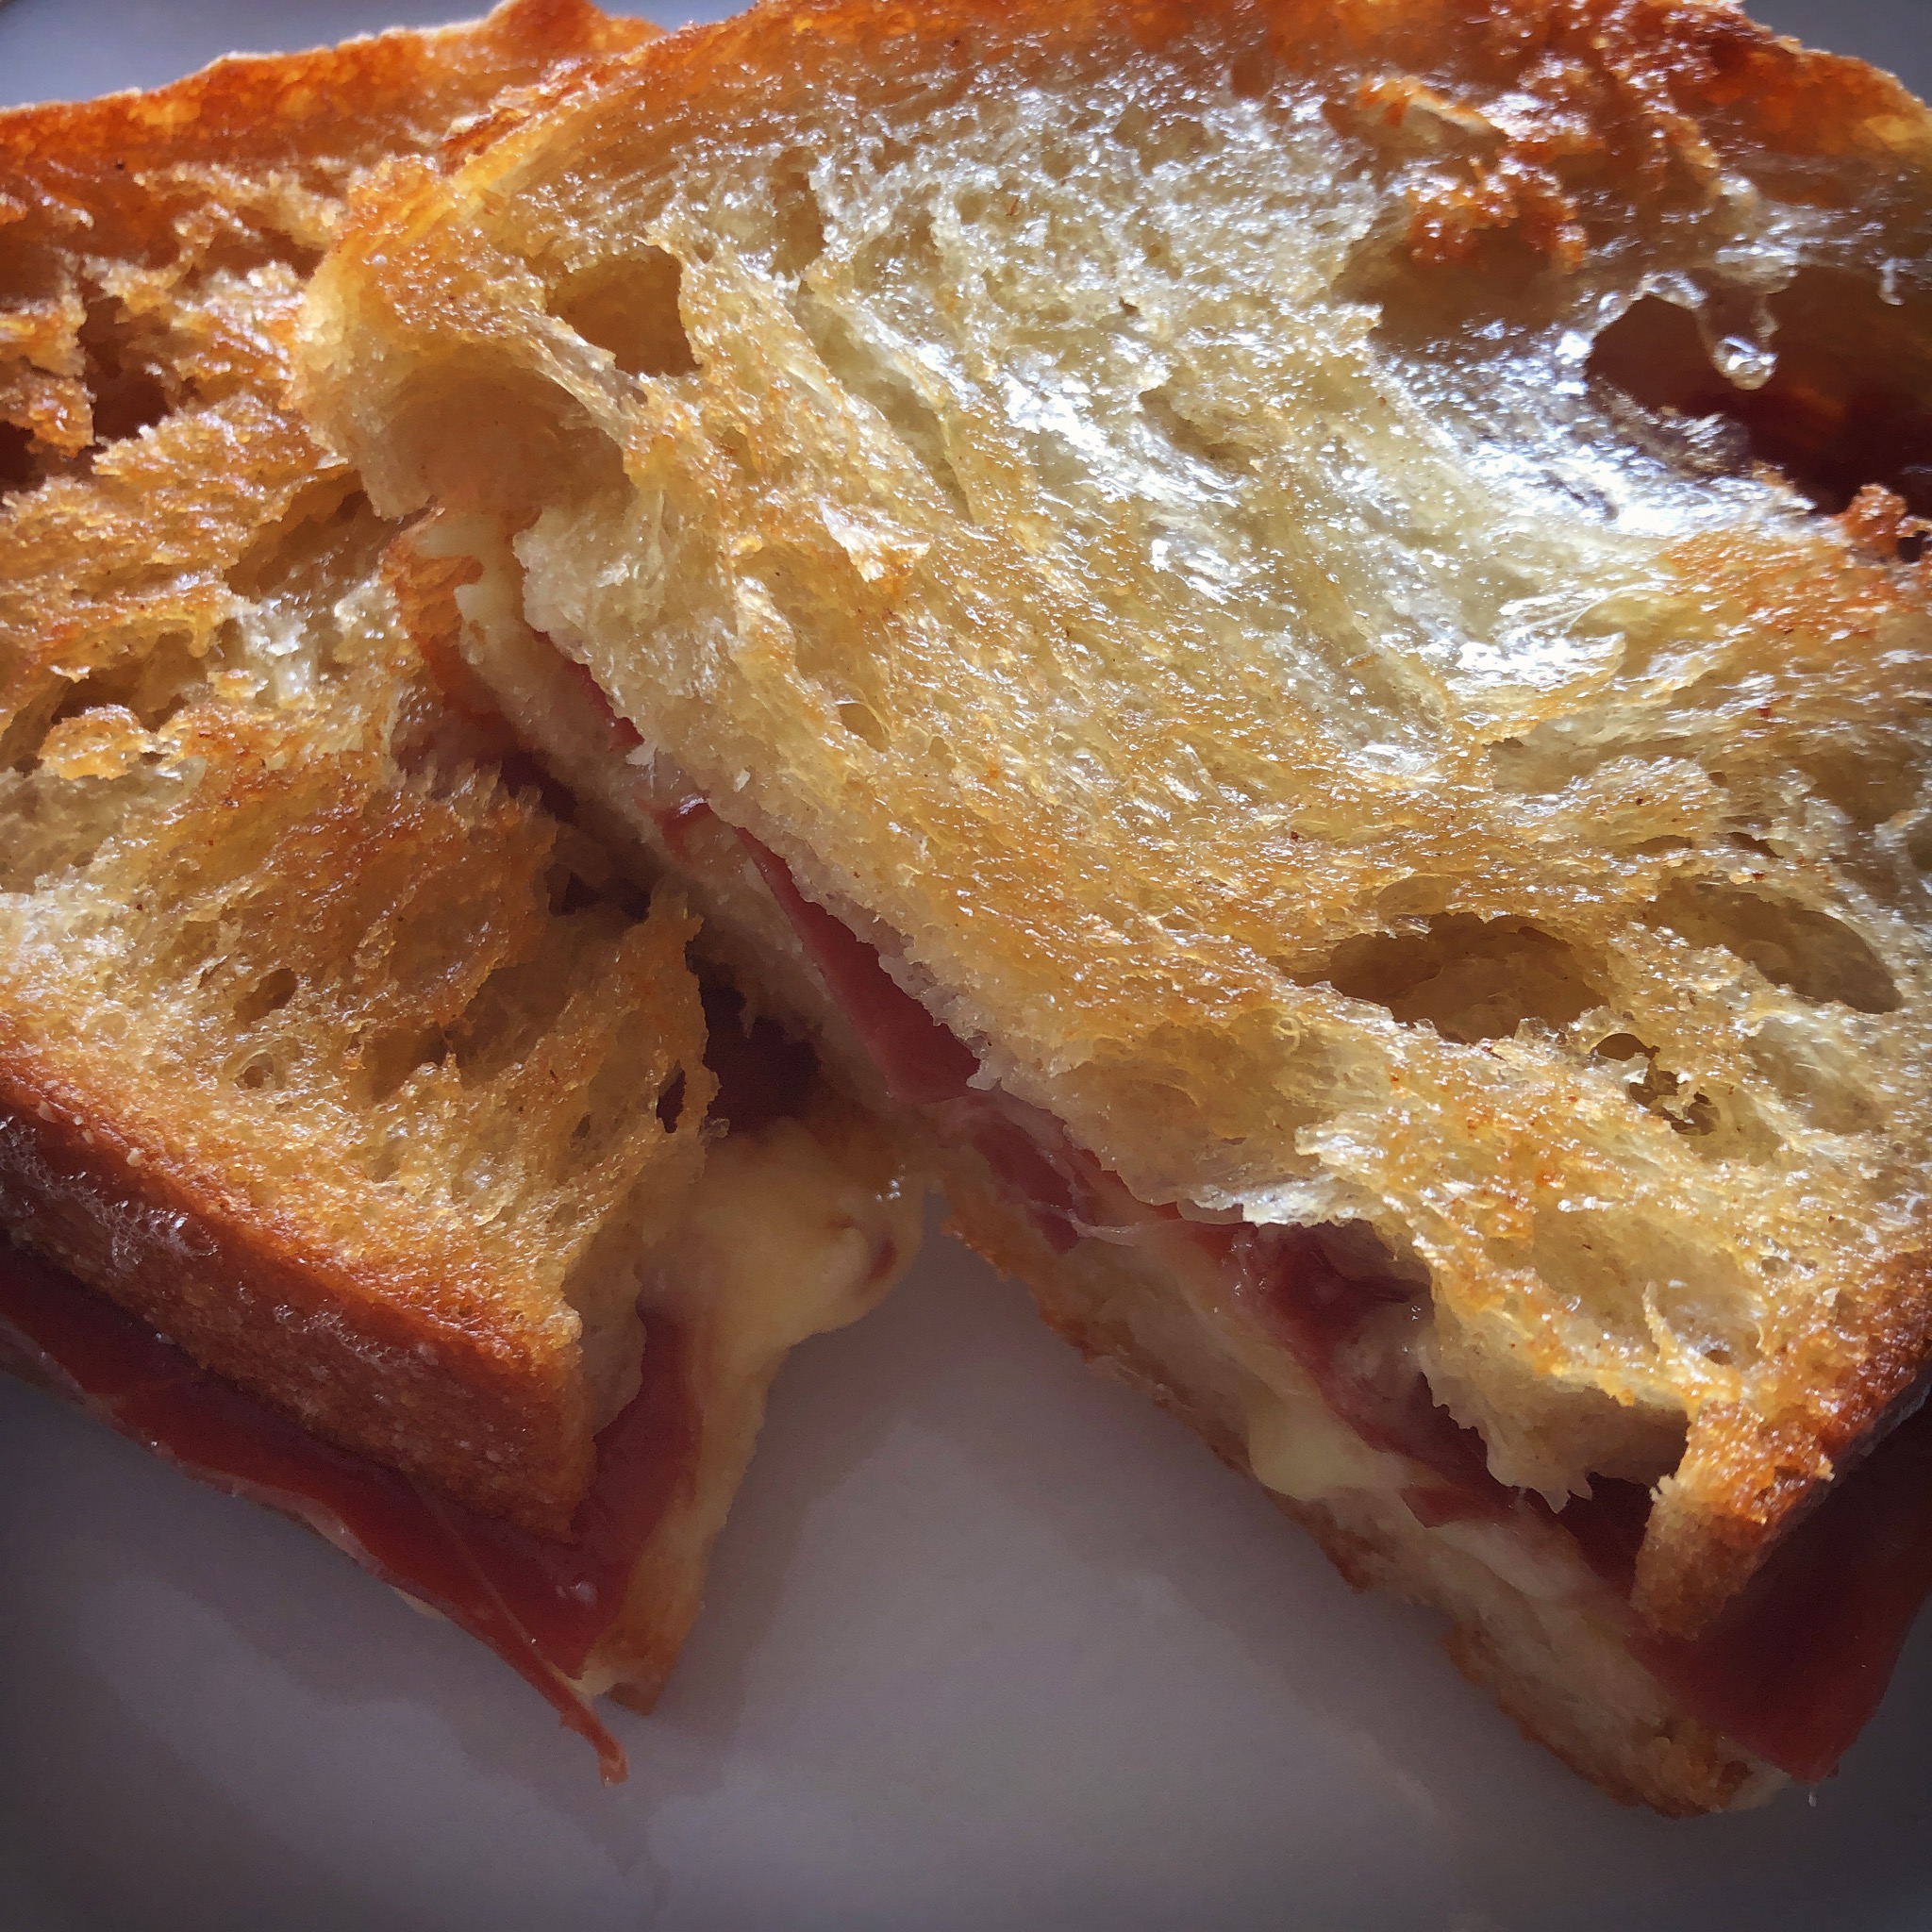 Cheese and Ham Toasted Sourdough Sandwich - Time for a coffee